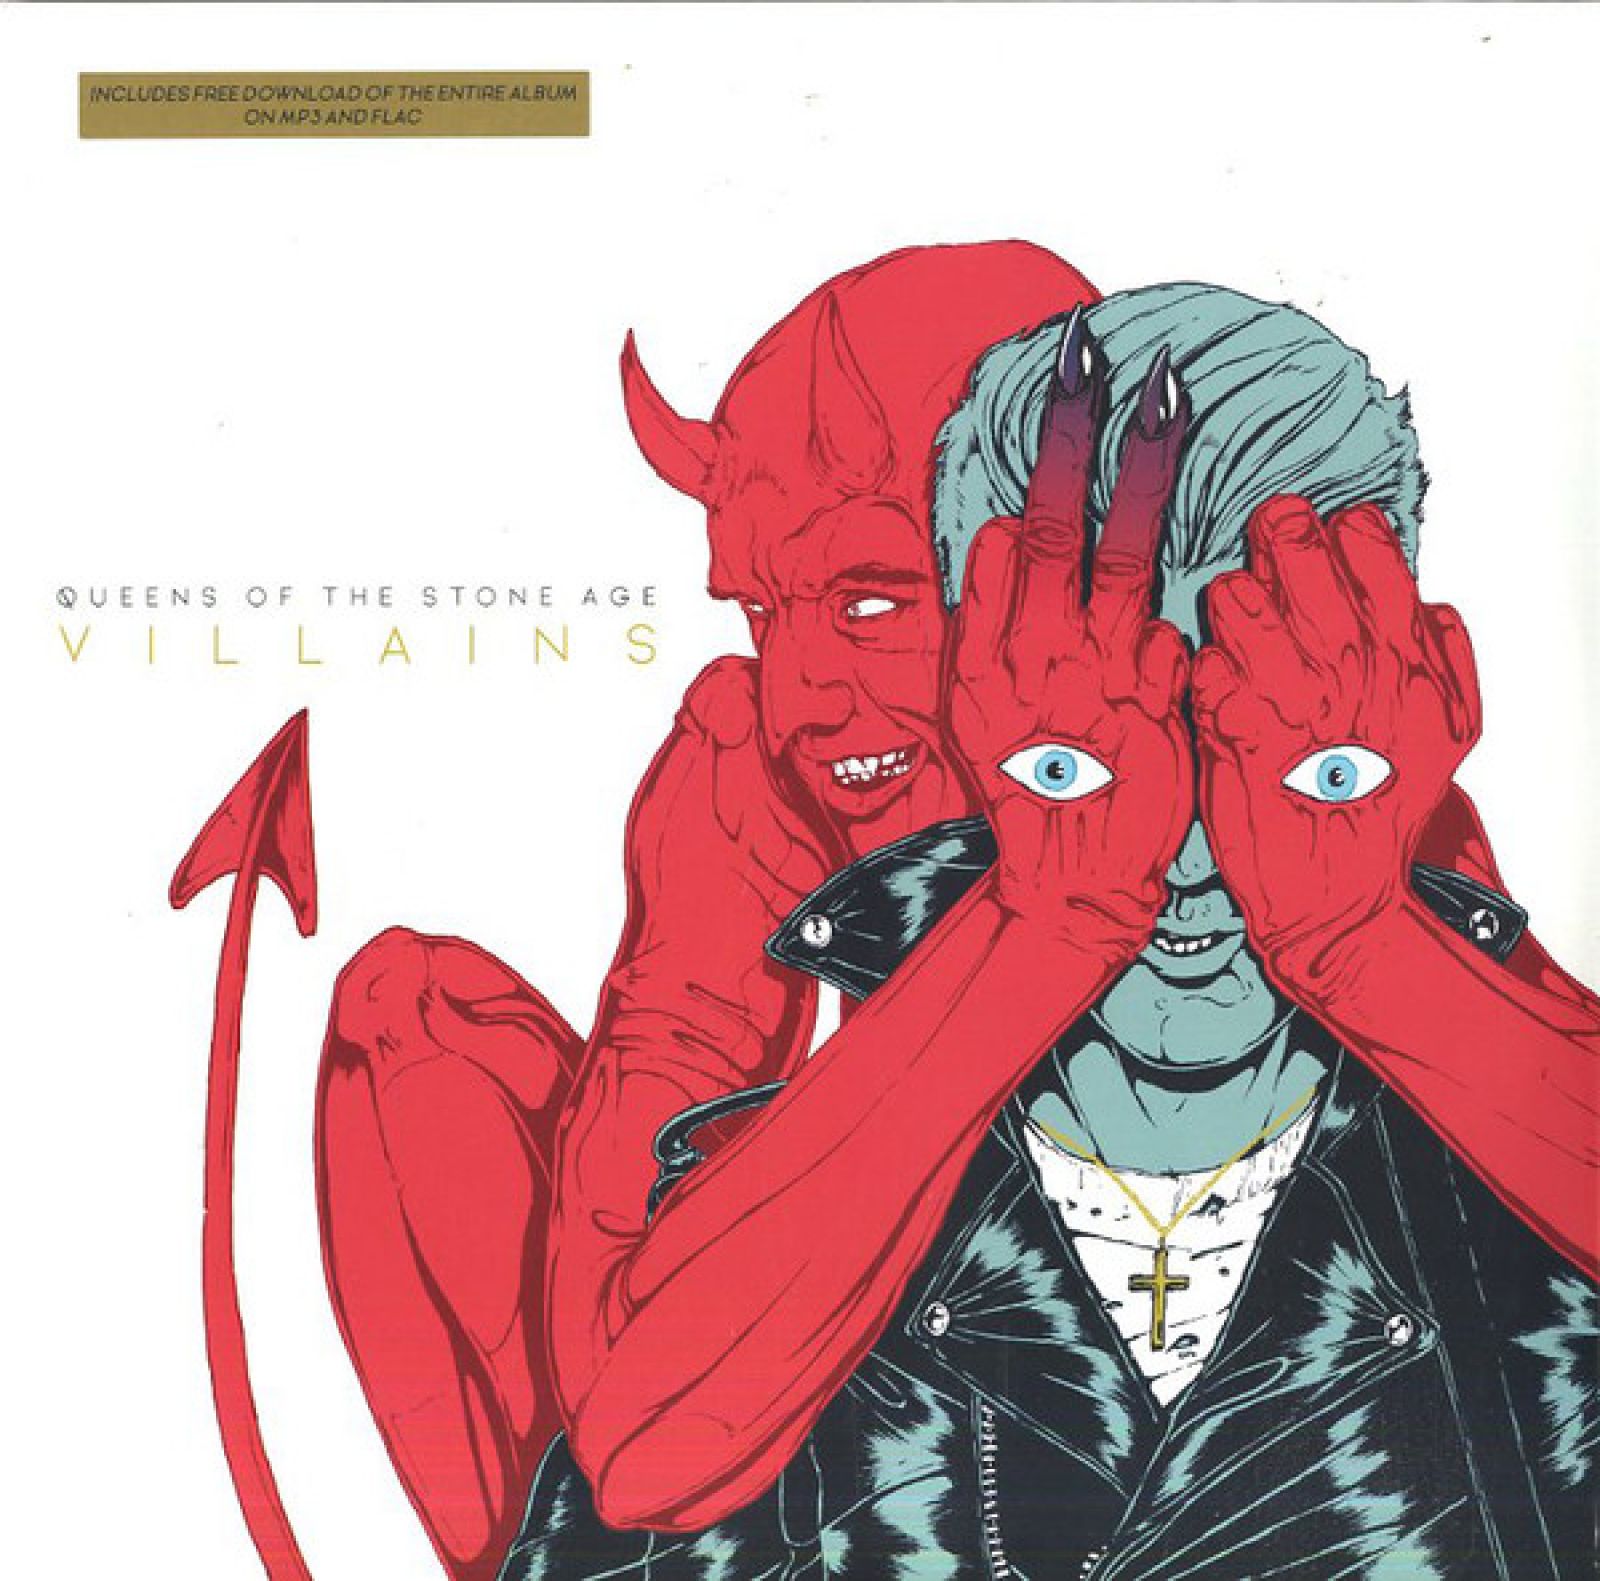 Виниловая пластинка Queens Of The Stone Age, Villains (0744861112518) audio cd queens of the stone age lullabies to paralyze